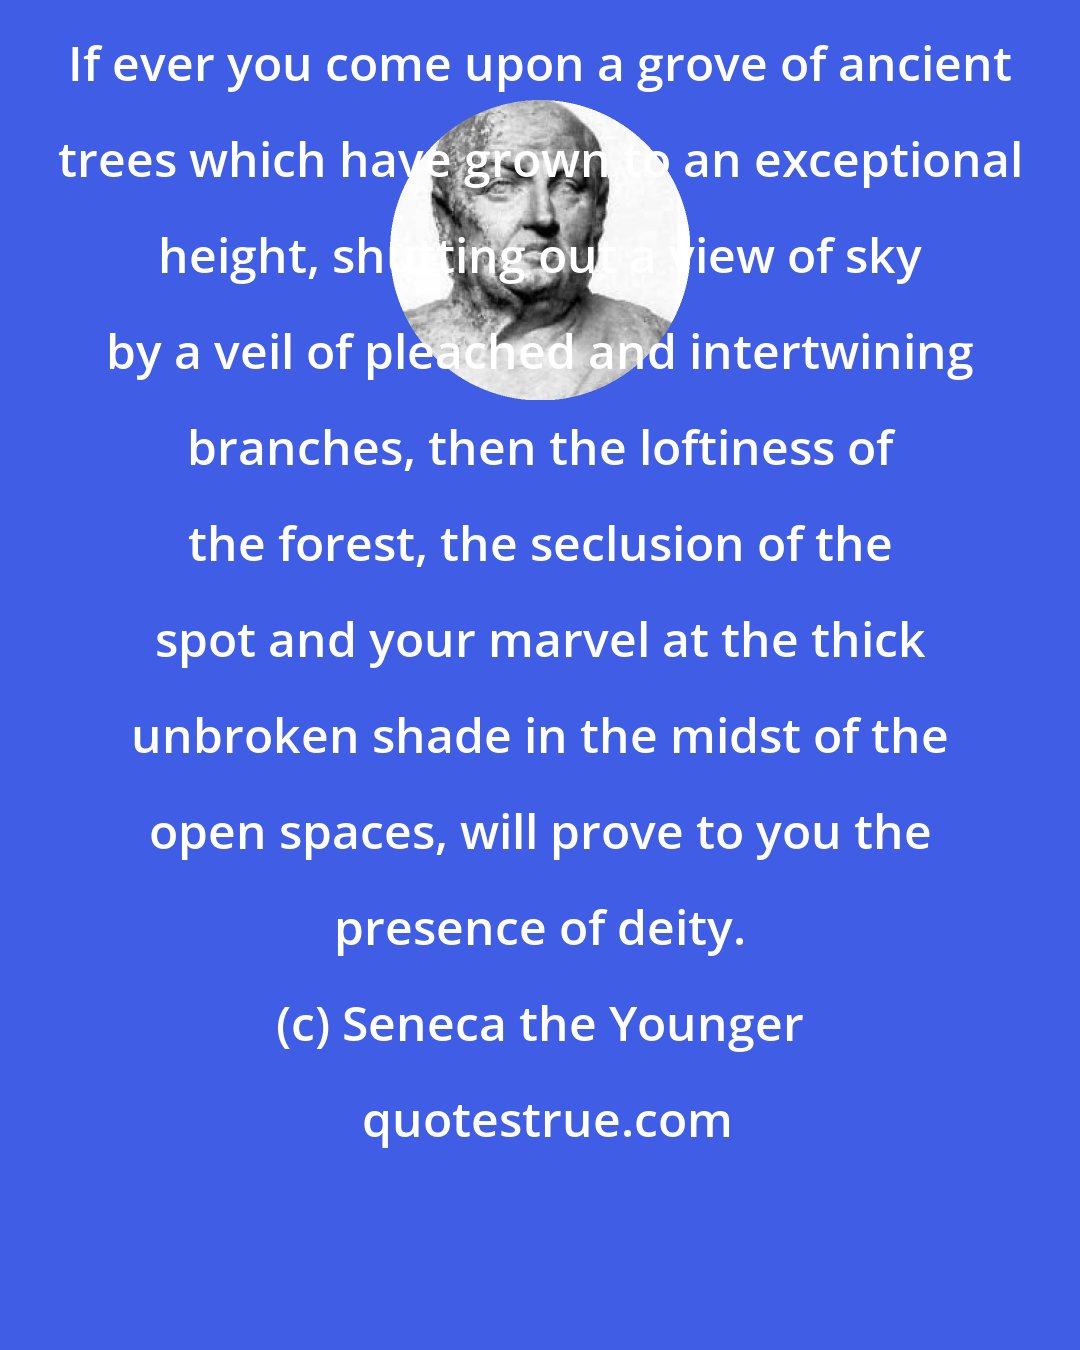 Seneca the Younger: If ever you come upon a grove of ancient trees which have grown to an exceptional height, shutting out a view of sky by a veil of pleached and intertwining branches, then the loftiness of the forest, the seclusion of the spot and your marvel at the thick unbroken shade in the midst of the open spaces, will prove to you the presence of deity.